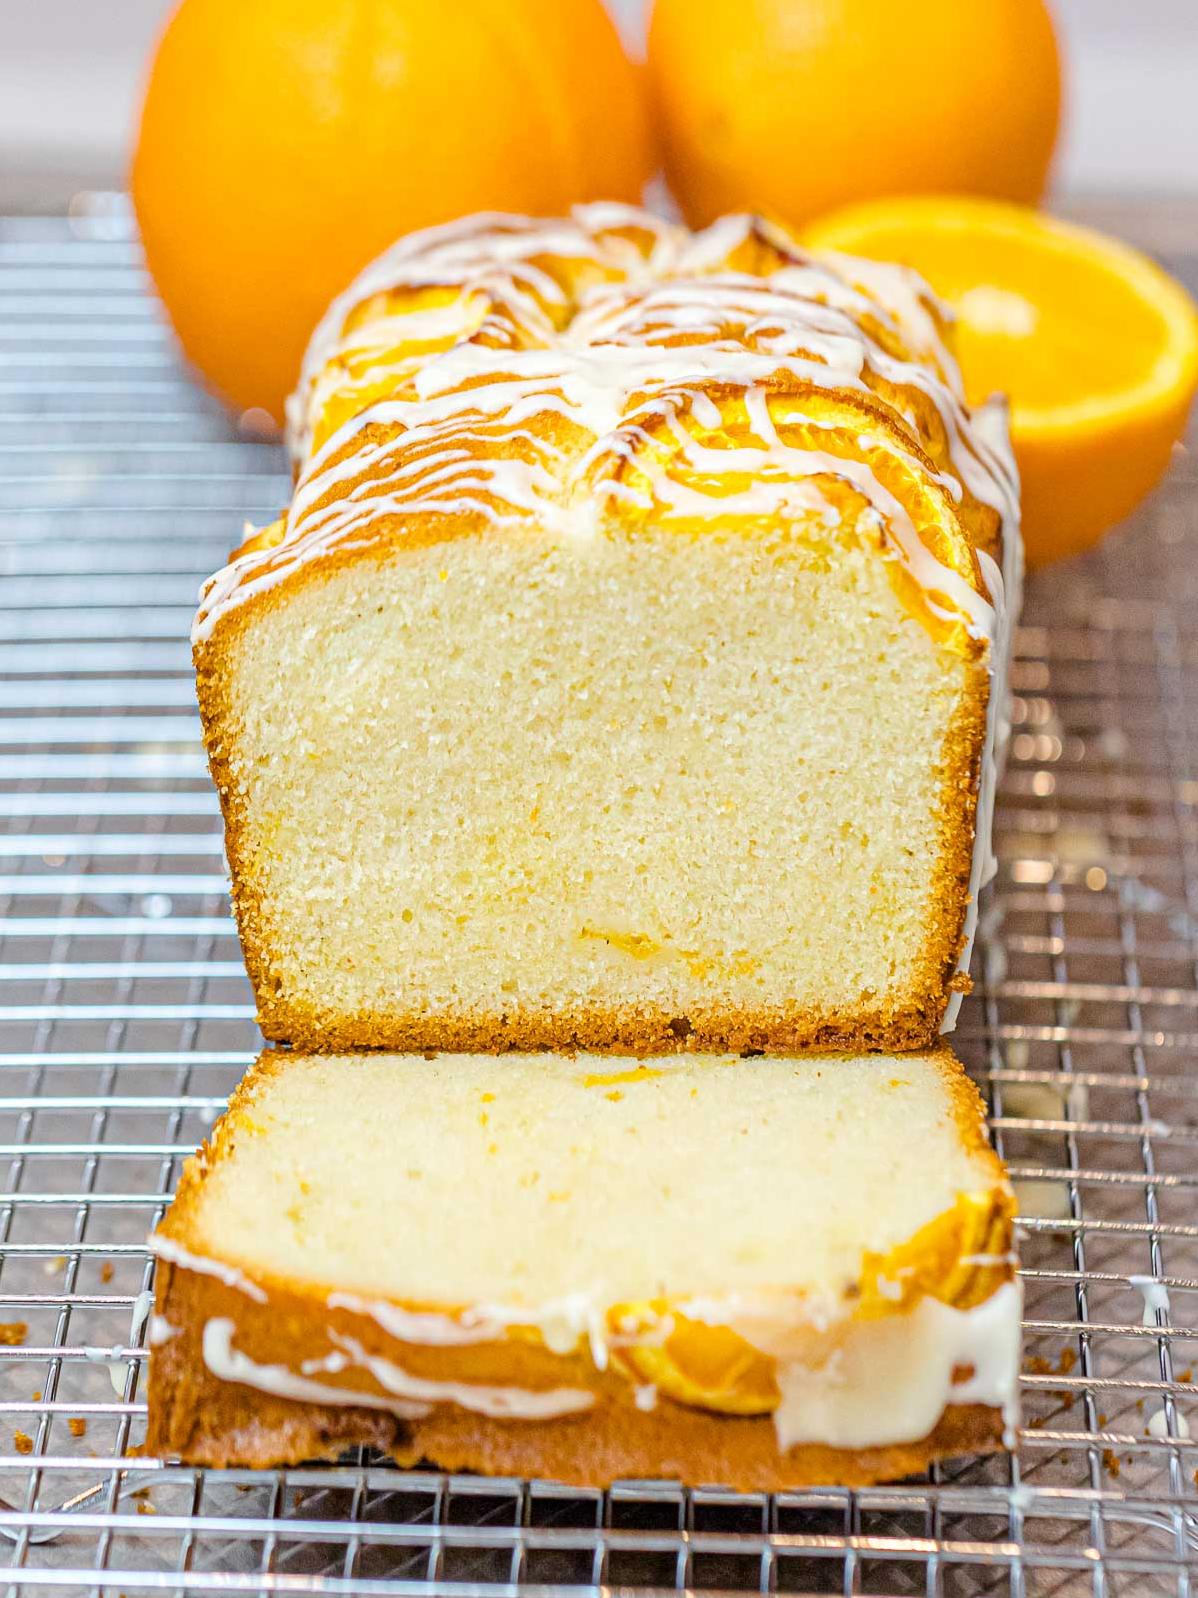  Zesty and refreshing, this cake is perfect for summertime treats.